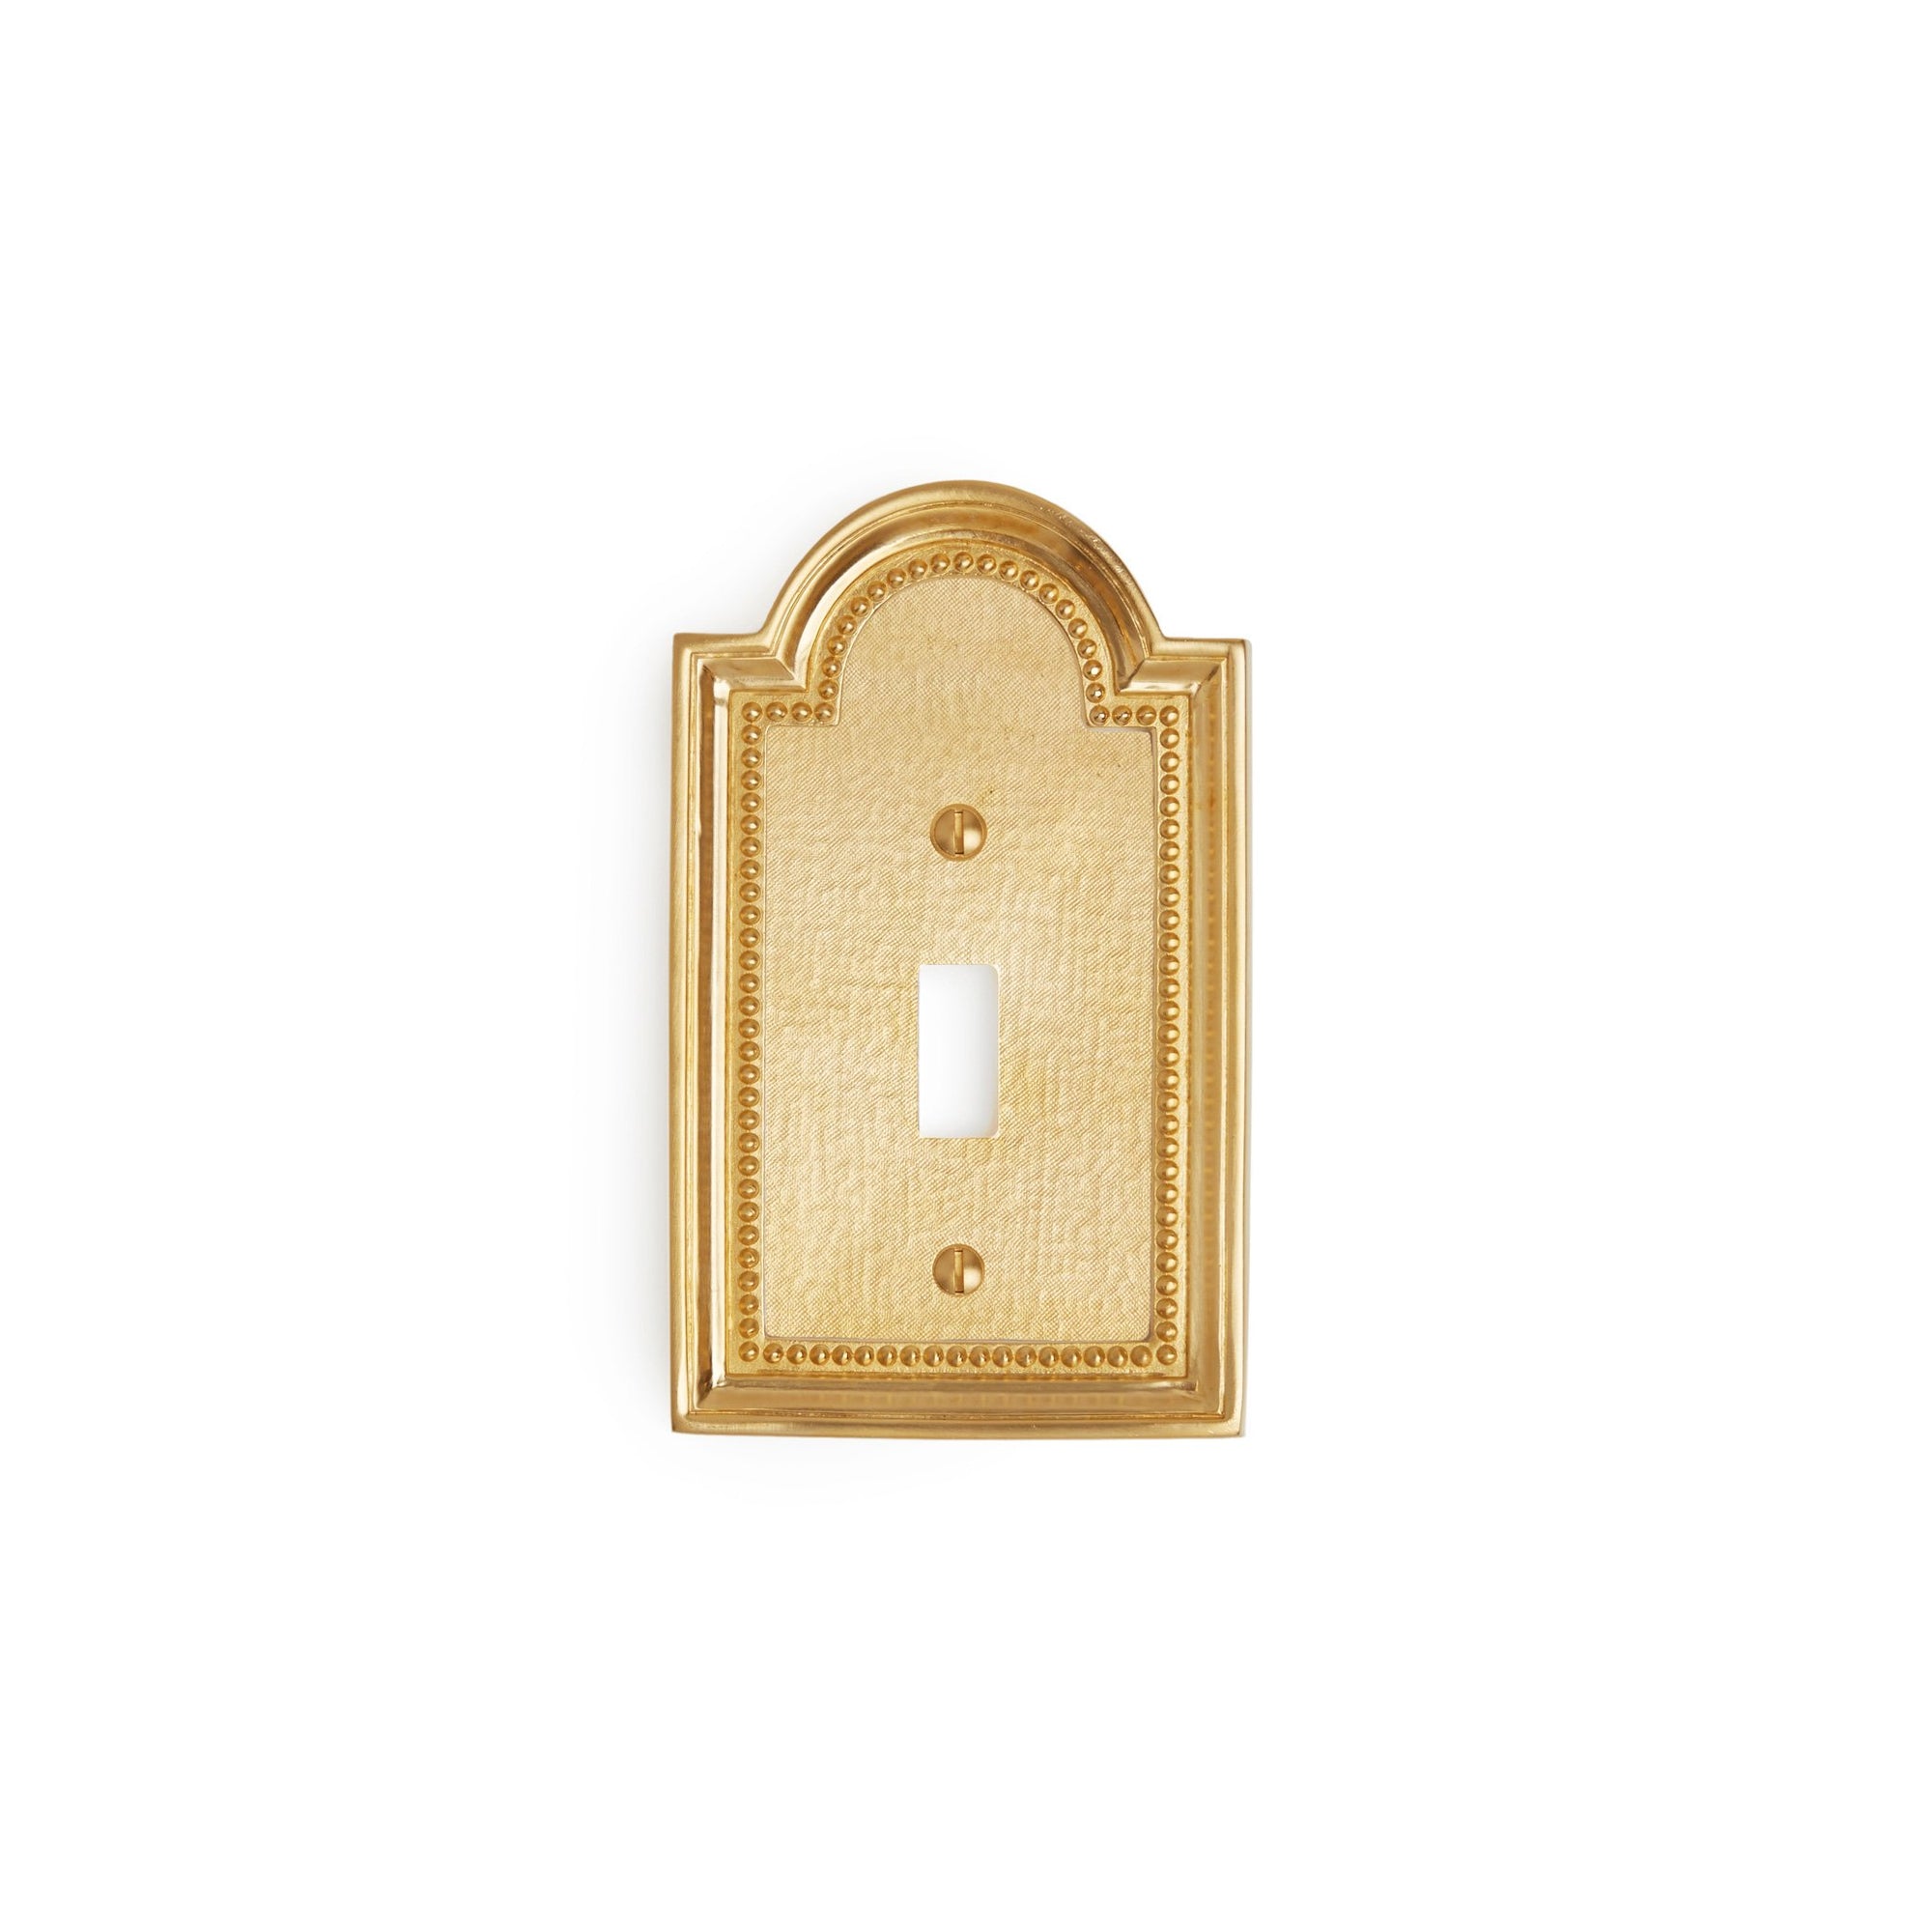 0470-SWT-GP Sherle Wagner International Classical Single Switch Plate in Gold Plate metal finish